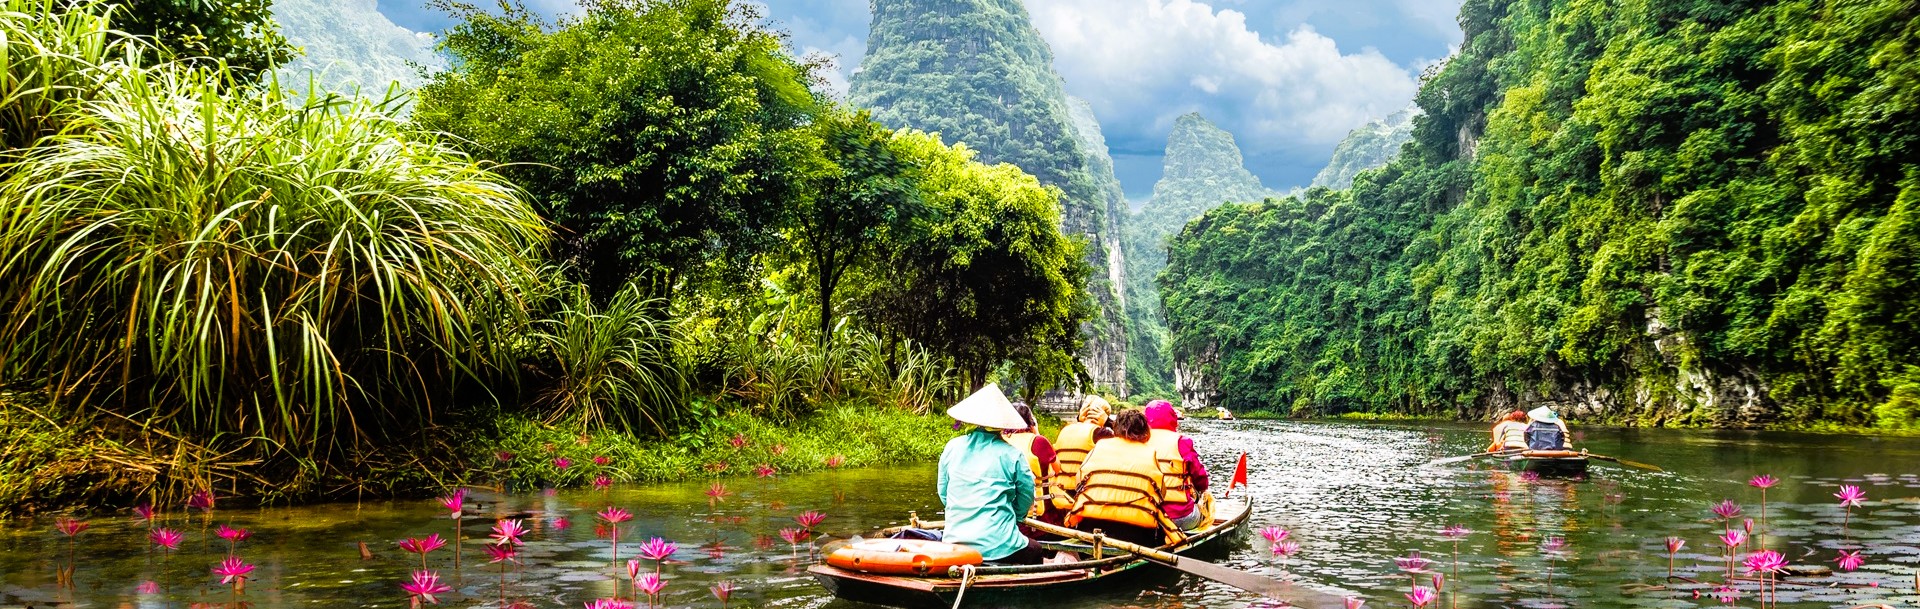 North to South Vietnam Adventure with added excursions